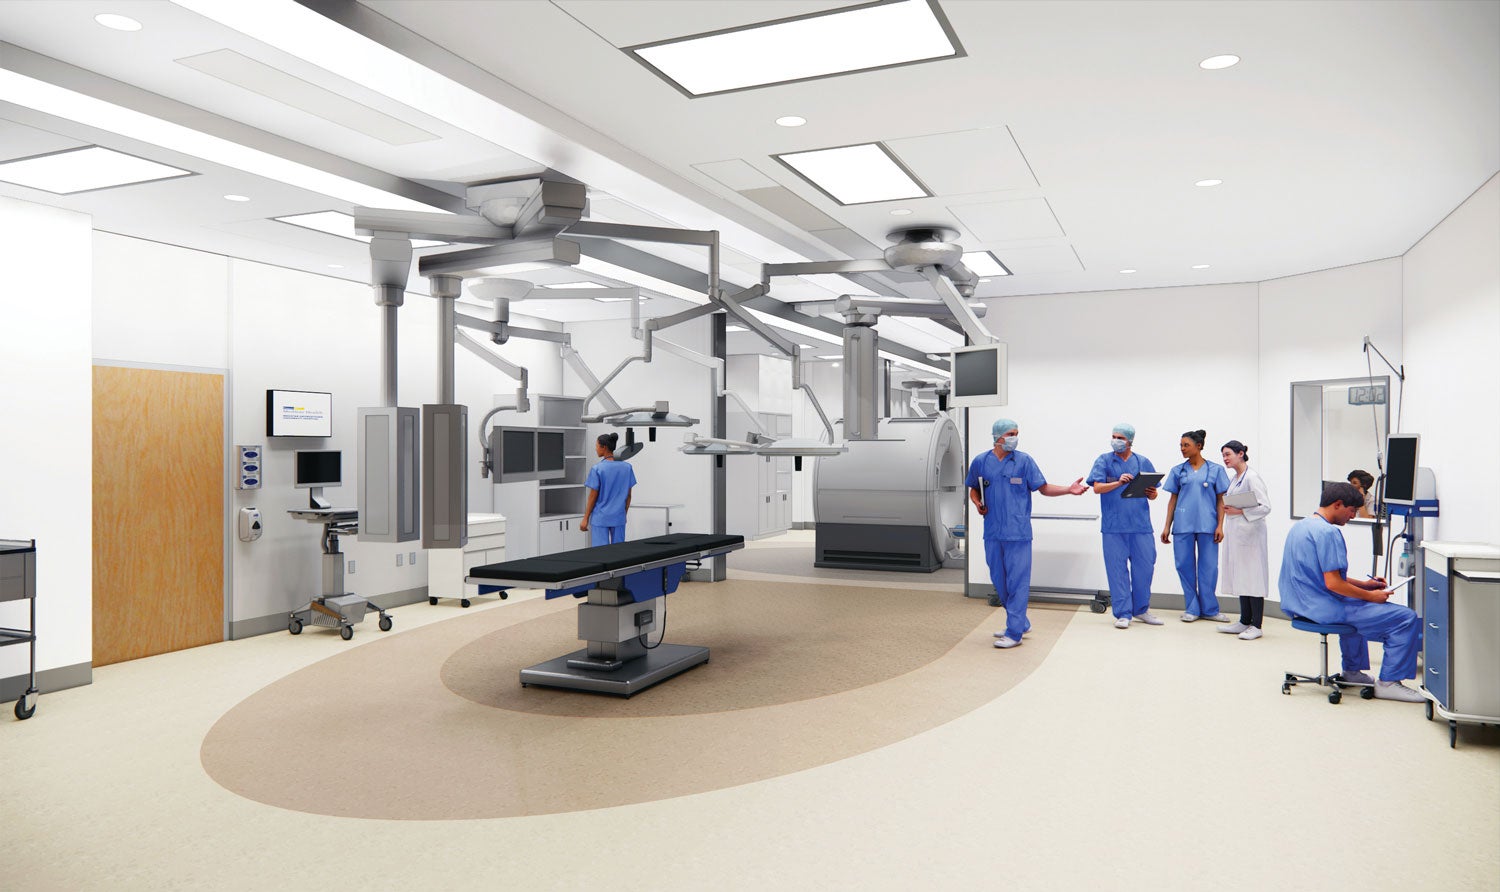 The new Medical/Surgical Pavilion will feature technology like this new iMRI suite. Construction is scheduled for completion in 2023.